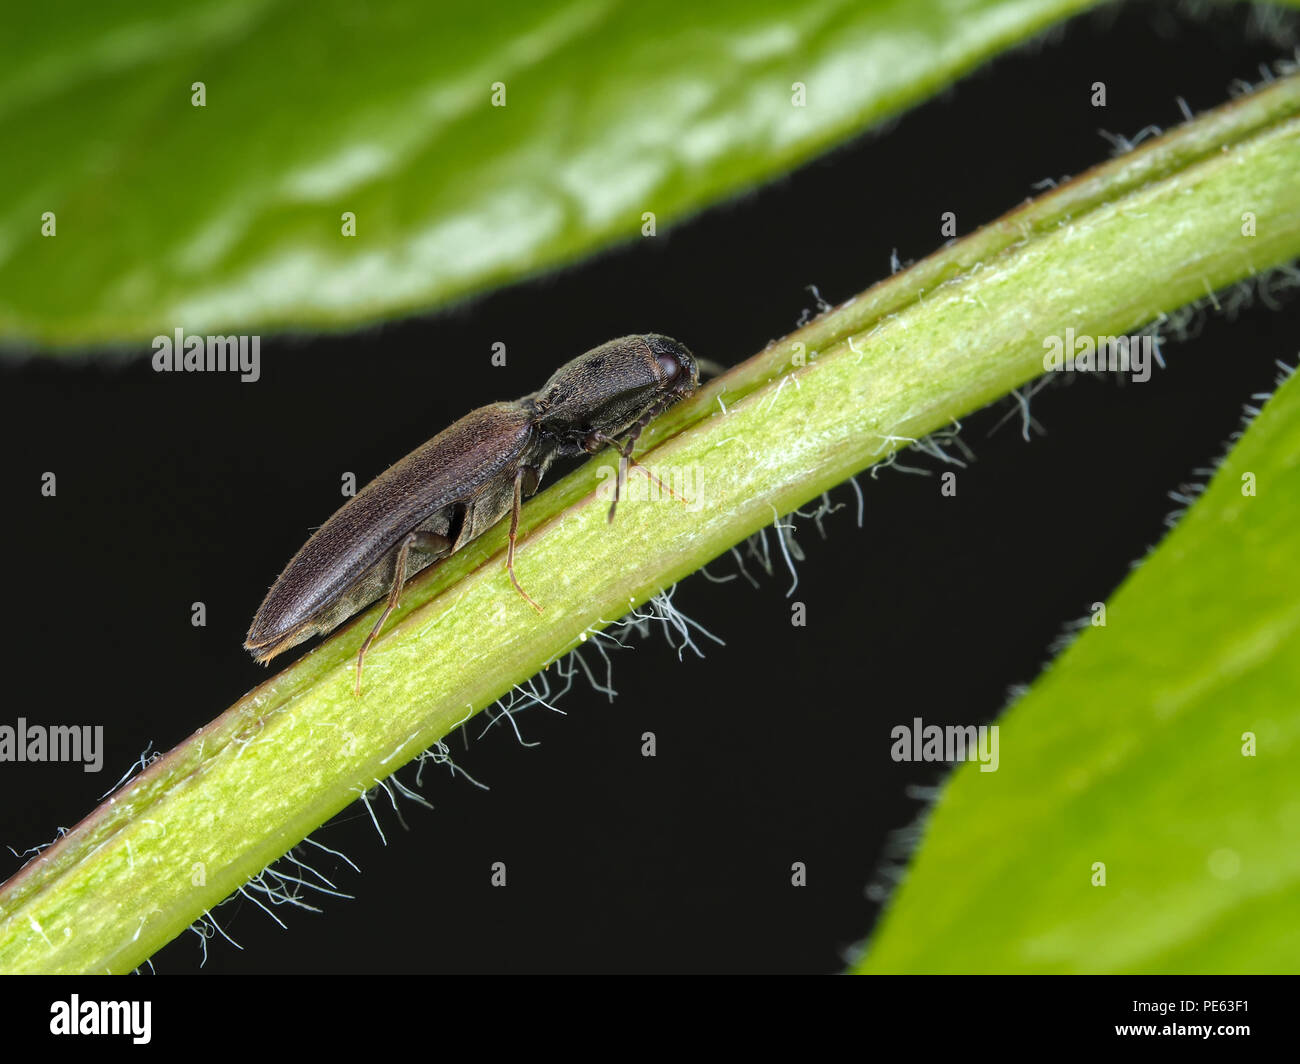 Black click beetle (Elateridae), side view Stock Photo